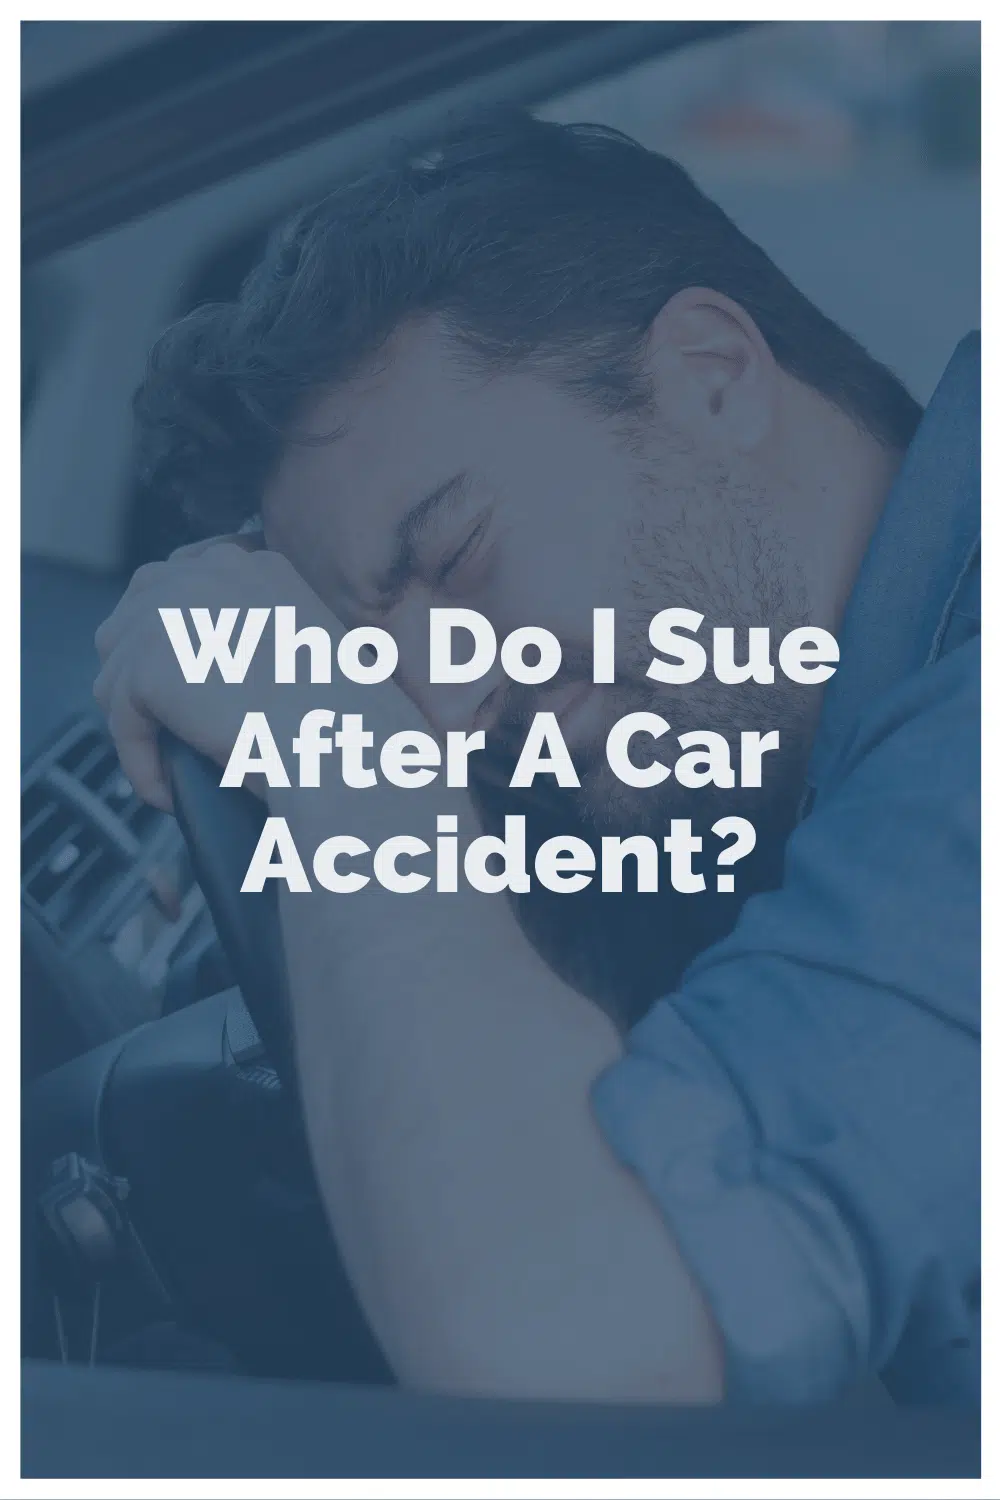 Who Do I Sue After A Car Accident?